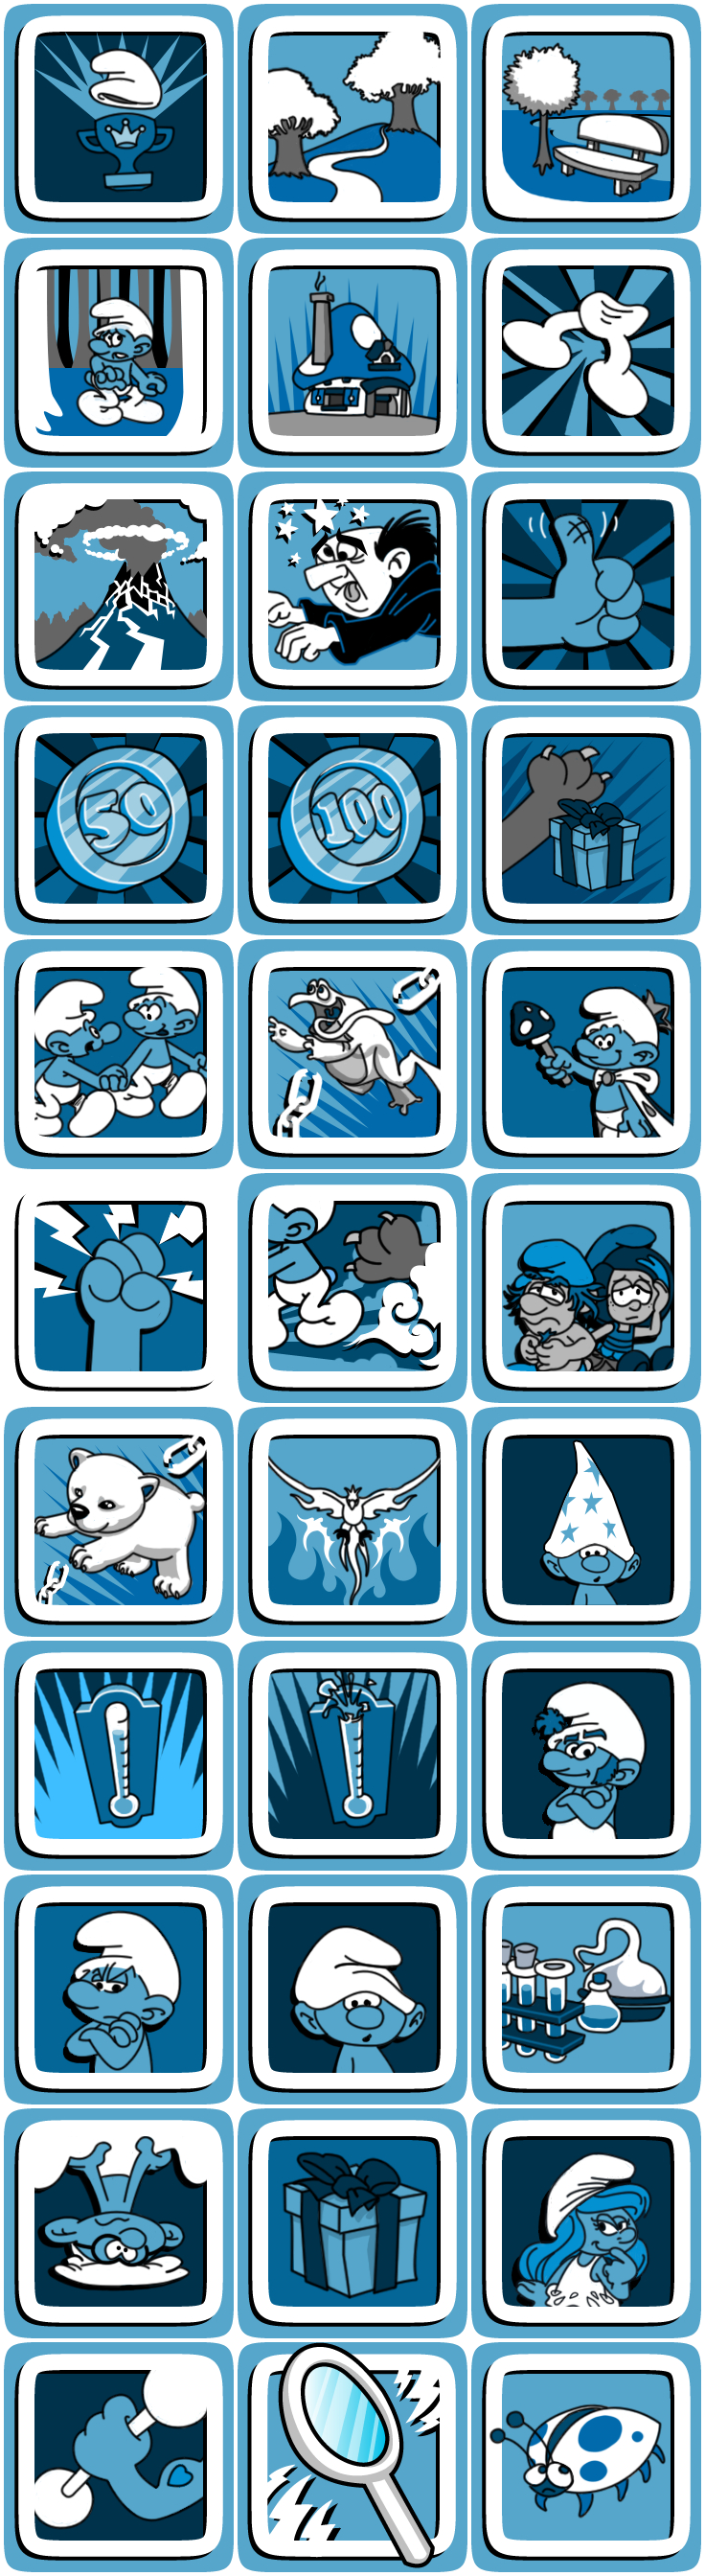 The Smurfs 2 - Trophy Icons